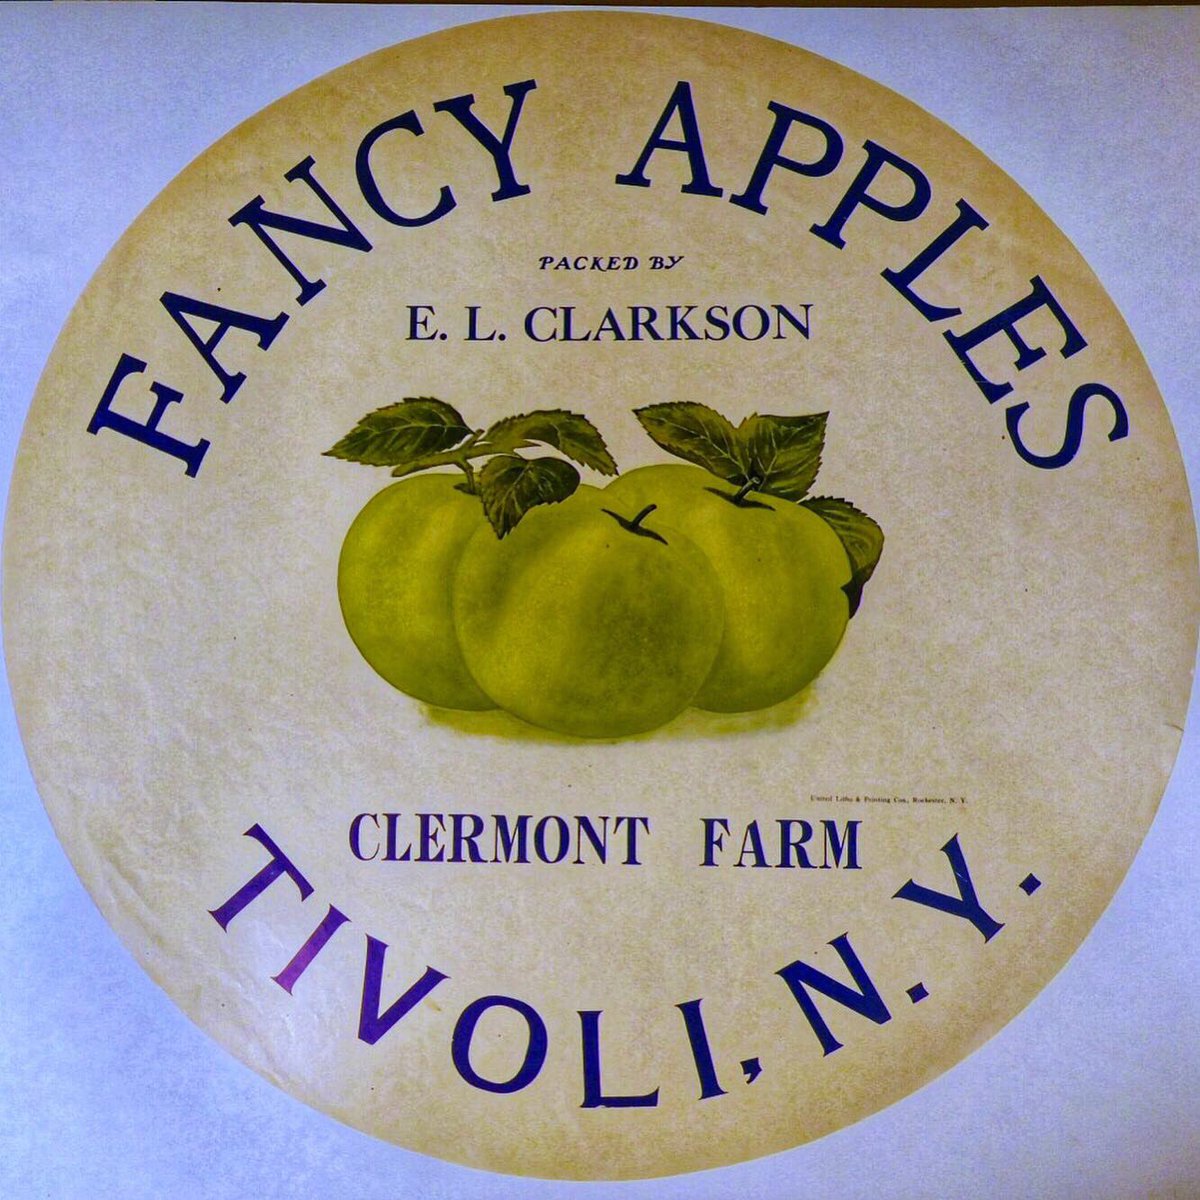 17 inches in diameter, this paper logo would be glued to the top of apple barrels to mark the farmer’s product. 

#redhookny #dutchesscounty #localhistory #vintagelabel #vintagelabels #materialculture #historicredhook #hudsonvalley #nyhistory #applegrowing #applegrowers #local